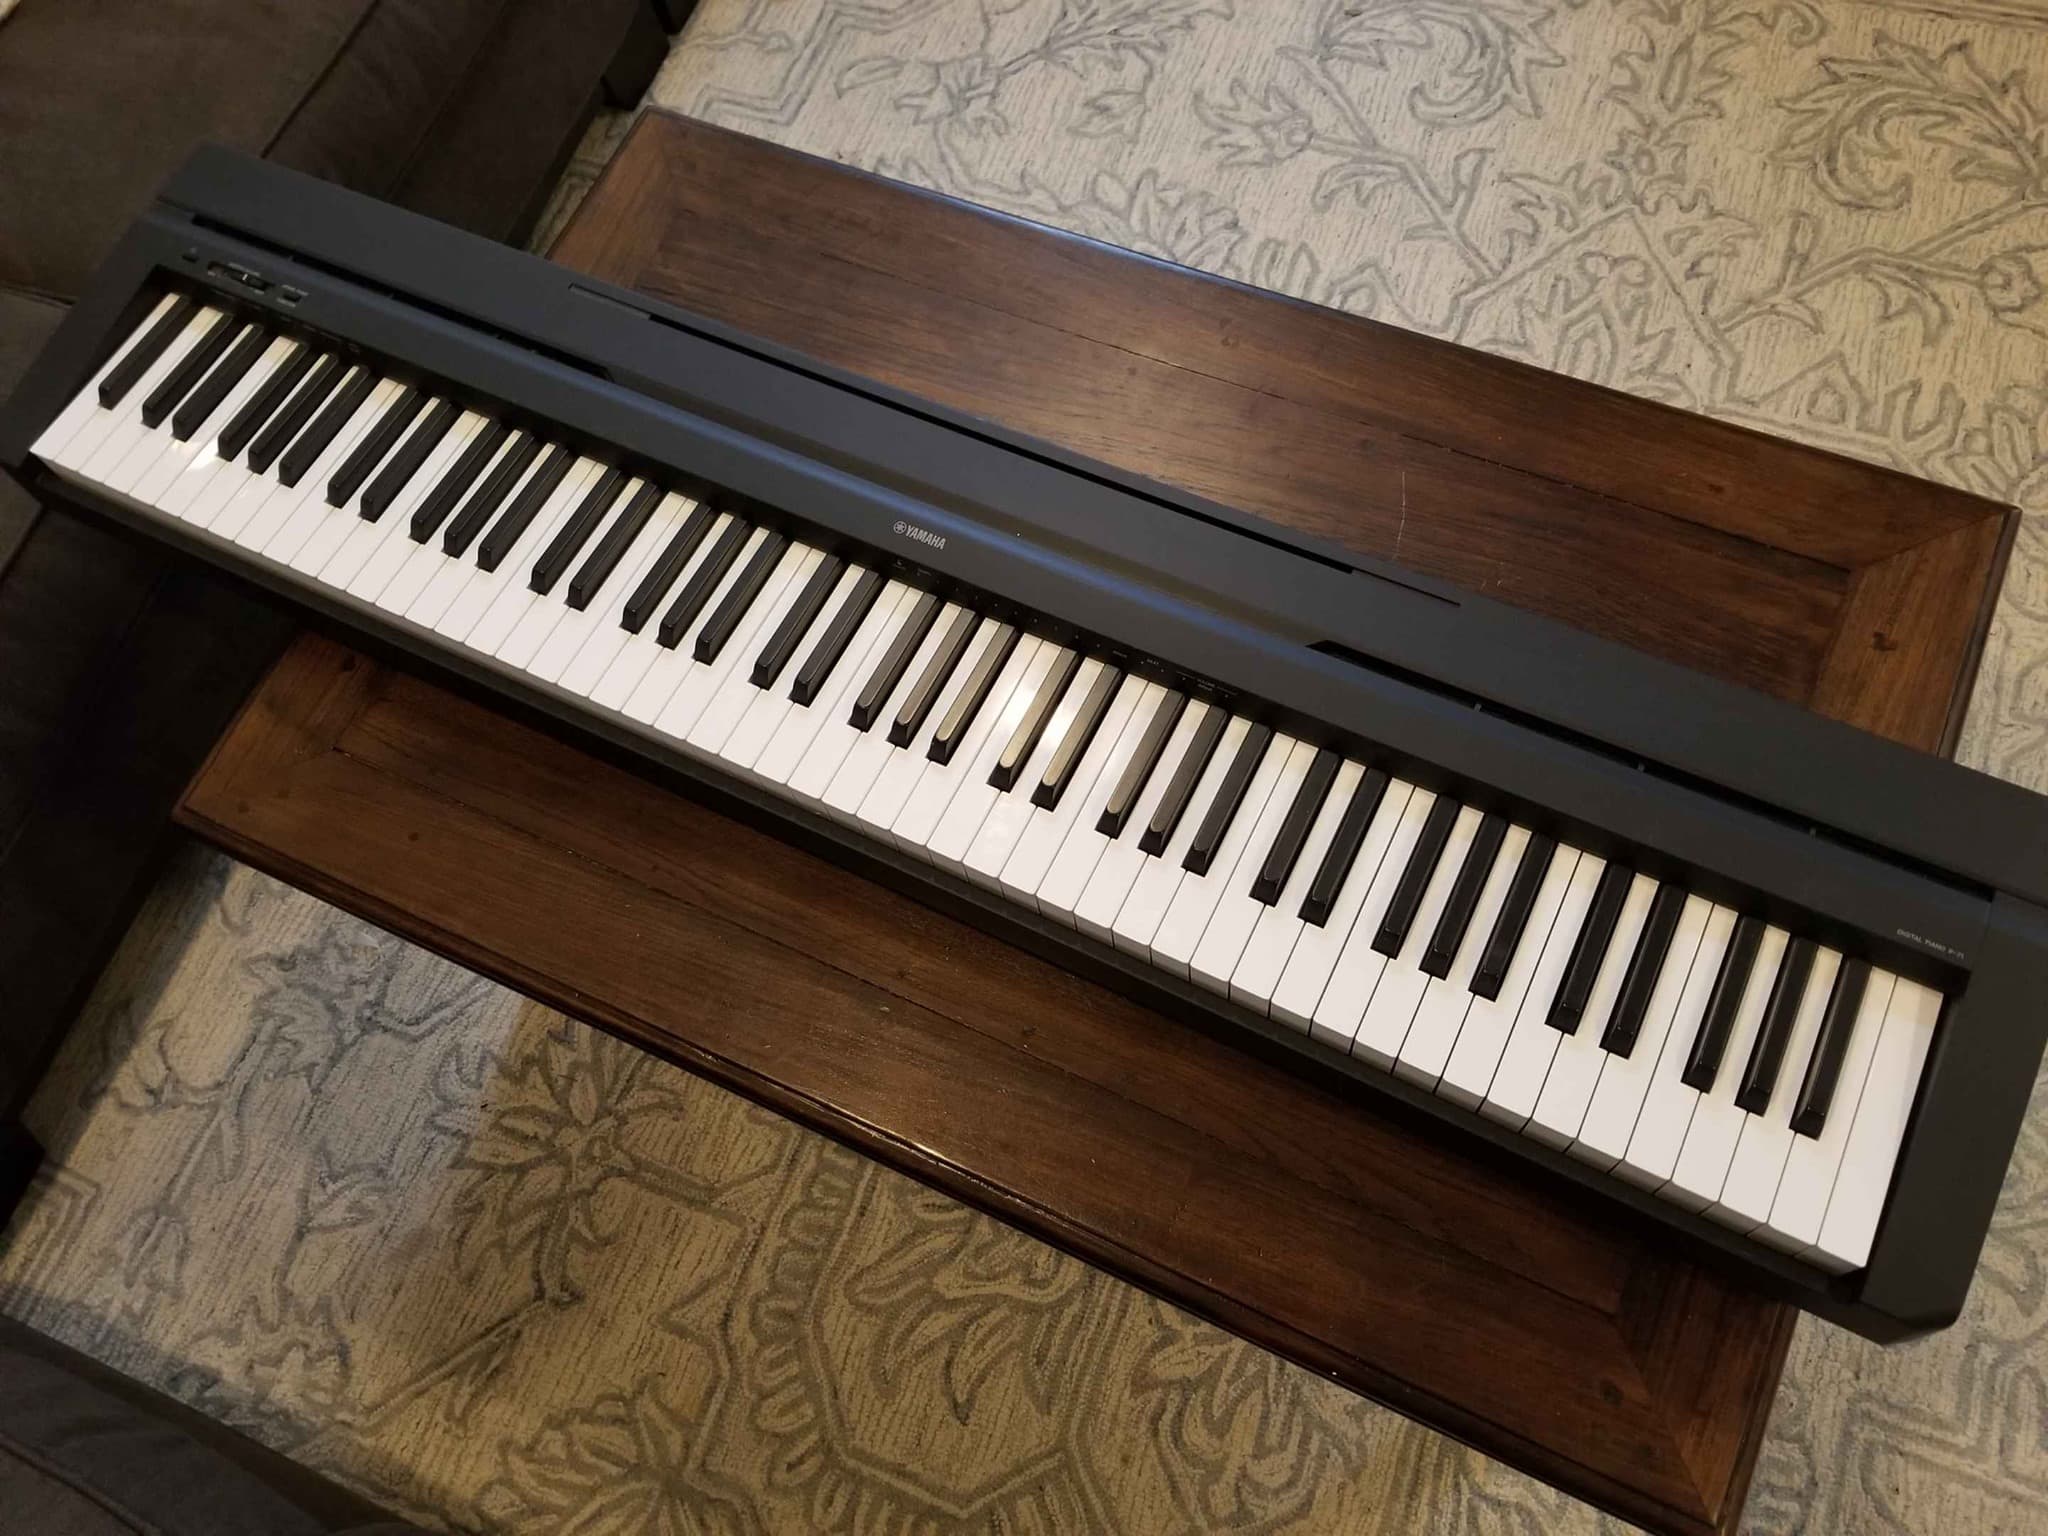 The Yamaha P71 is an Amazon exclusive that is readily available on the site